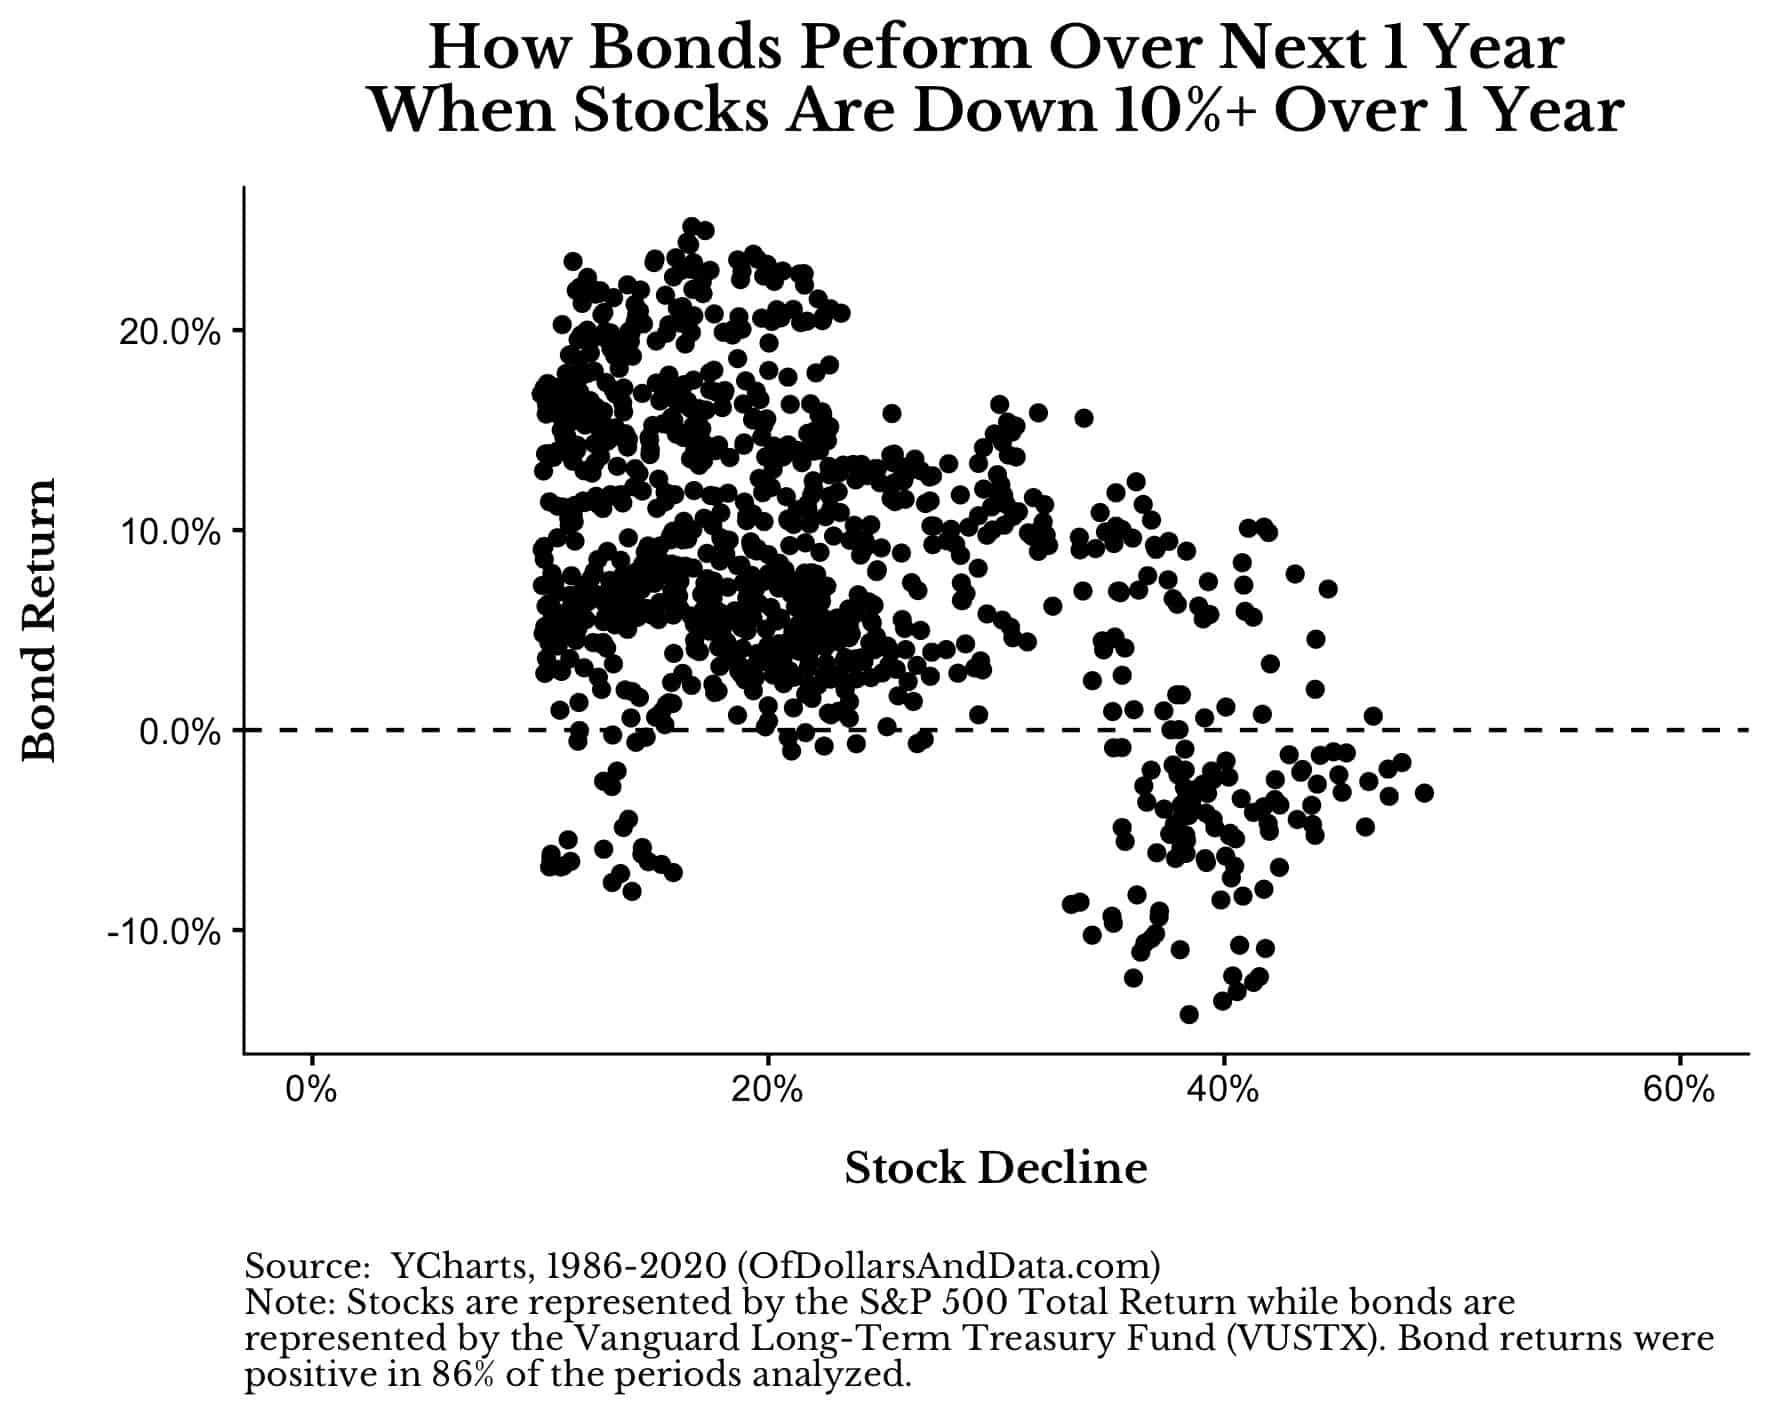 How bond perform over the next year when U.S. stocks are down 10% or more